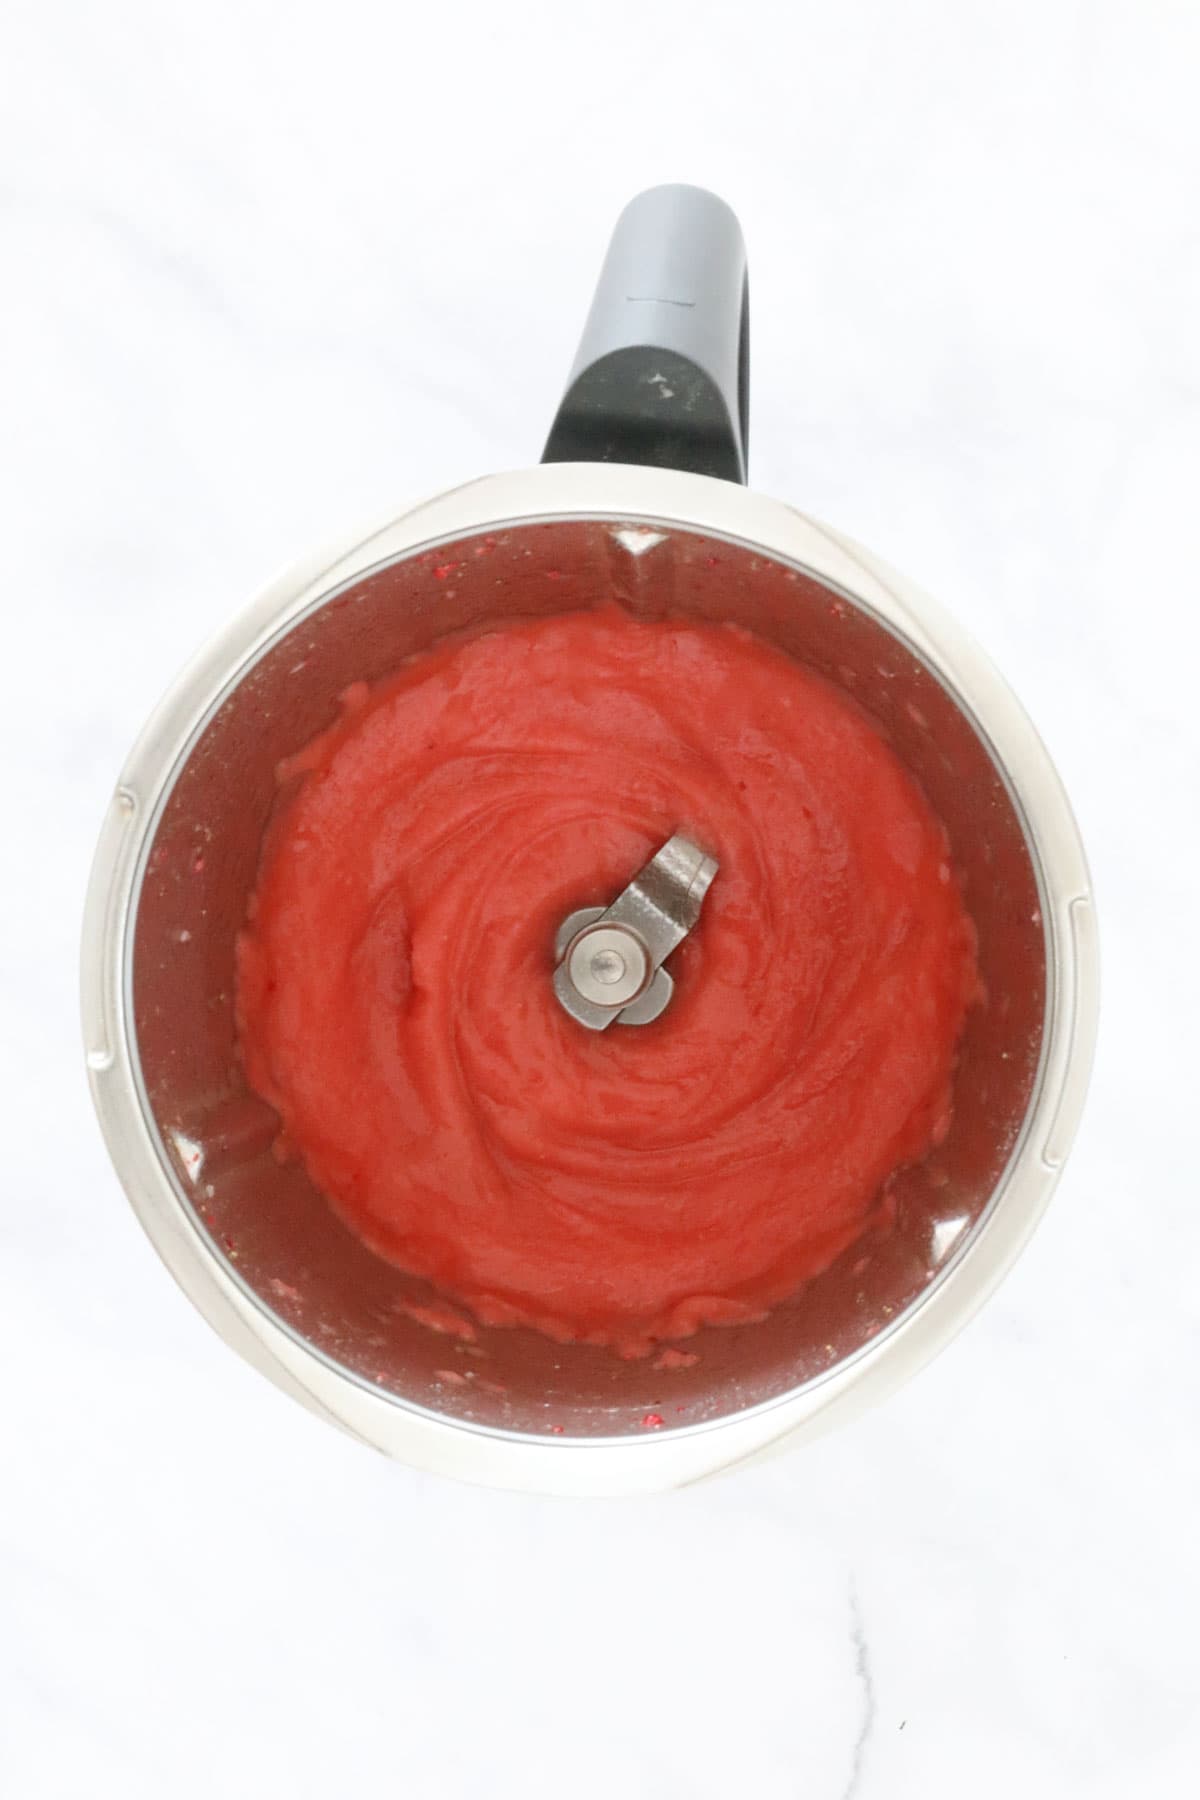 A Thermomix bowl filled with a strawberry cocktail.